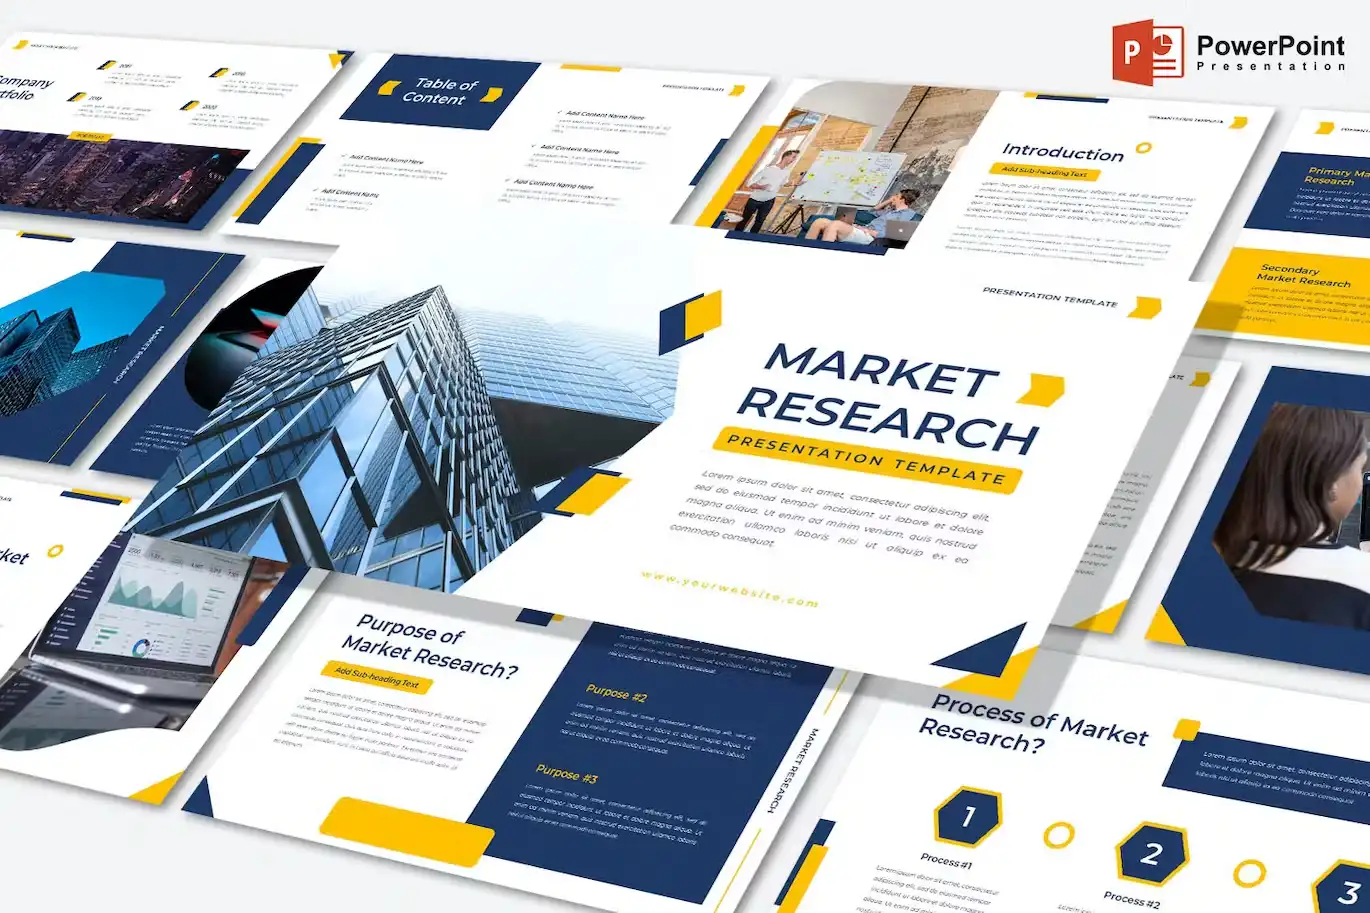 Market Research - PowerPoint template